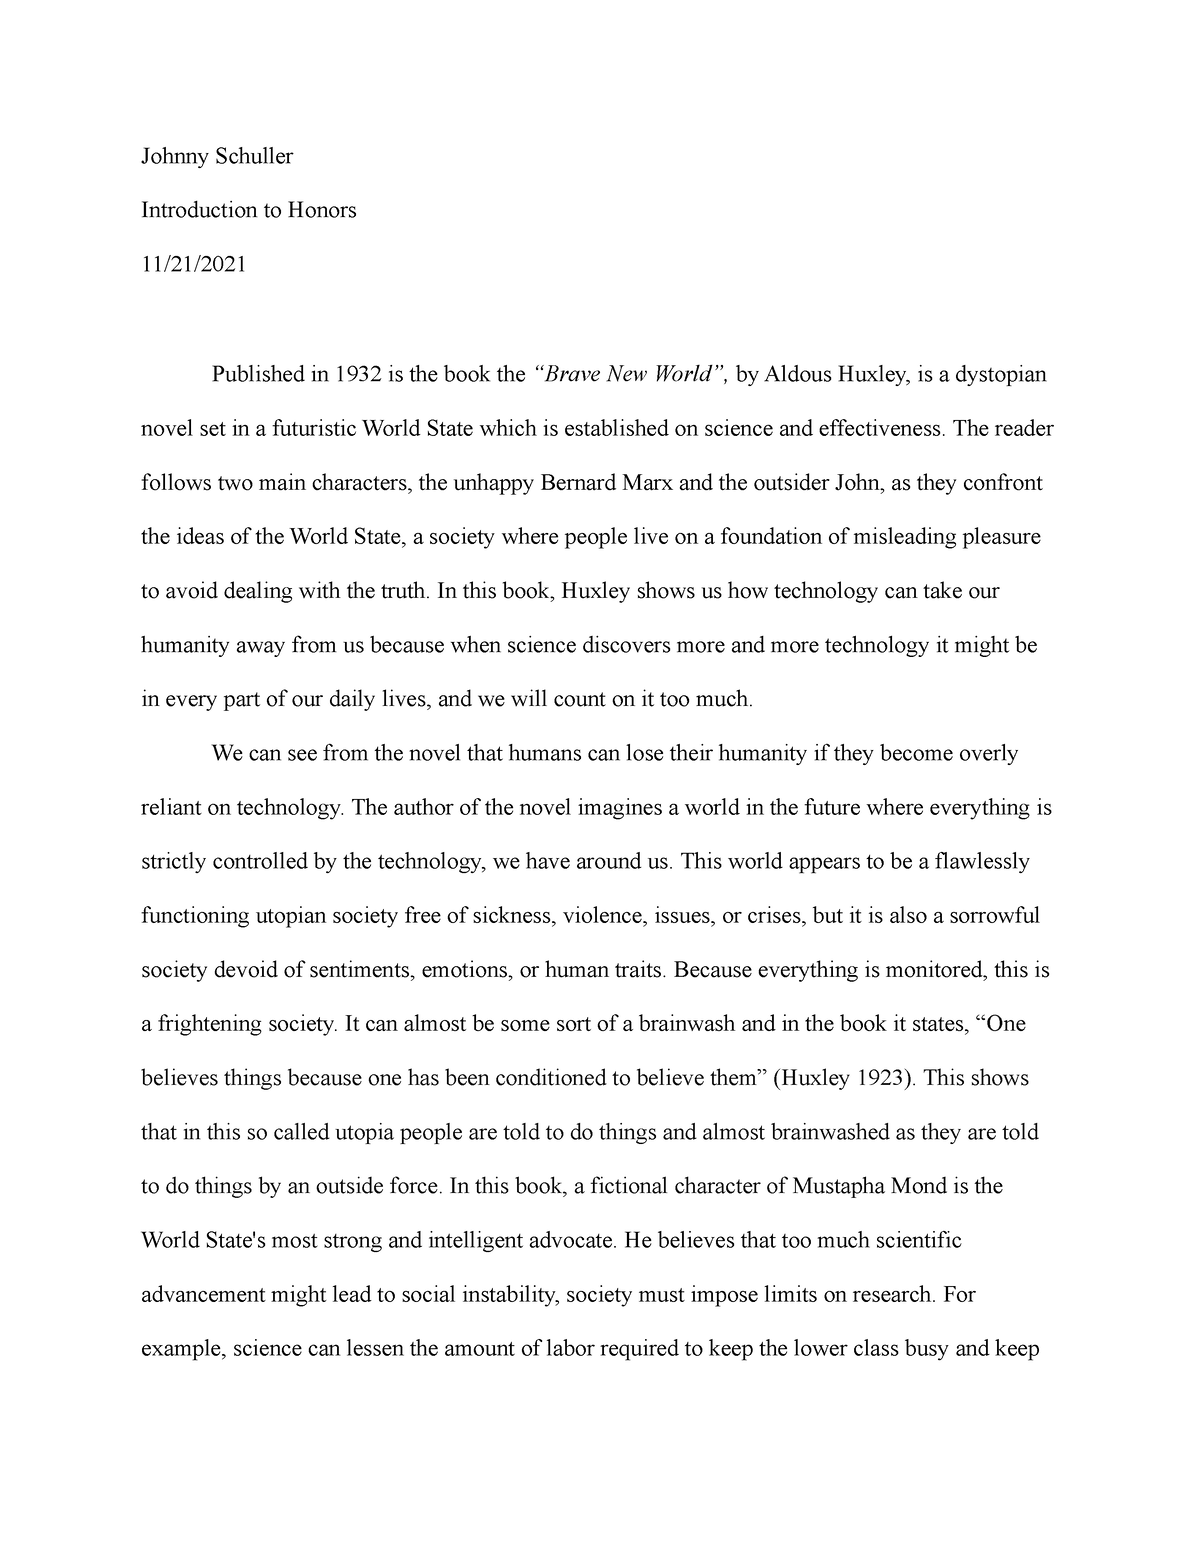 college essay guy honors section